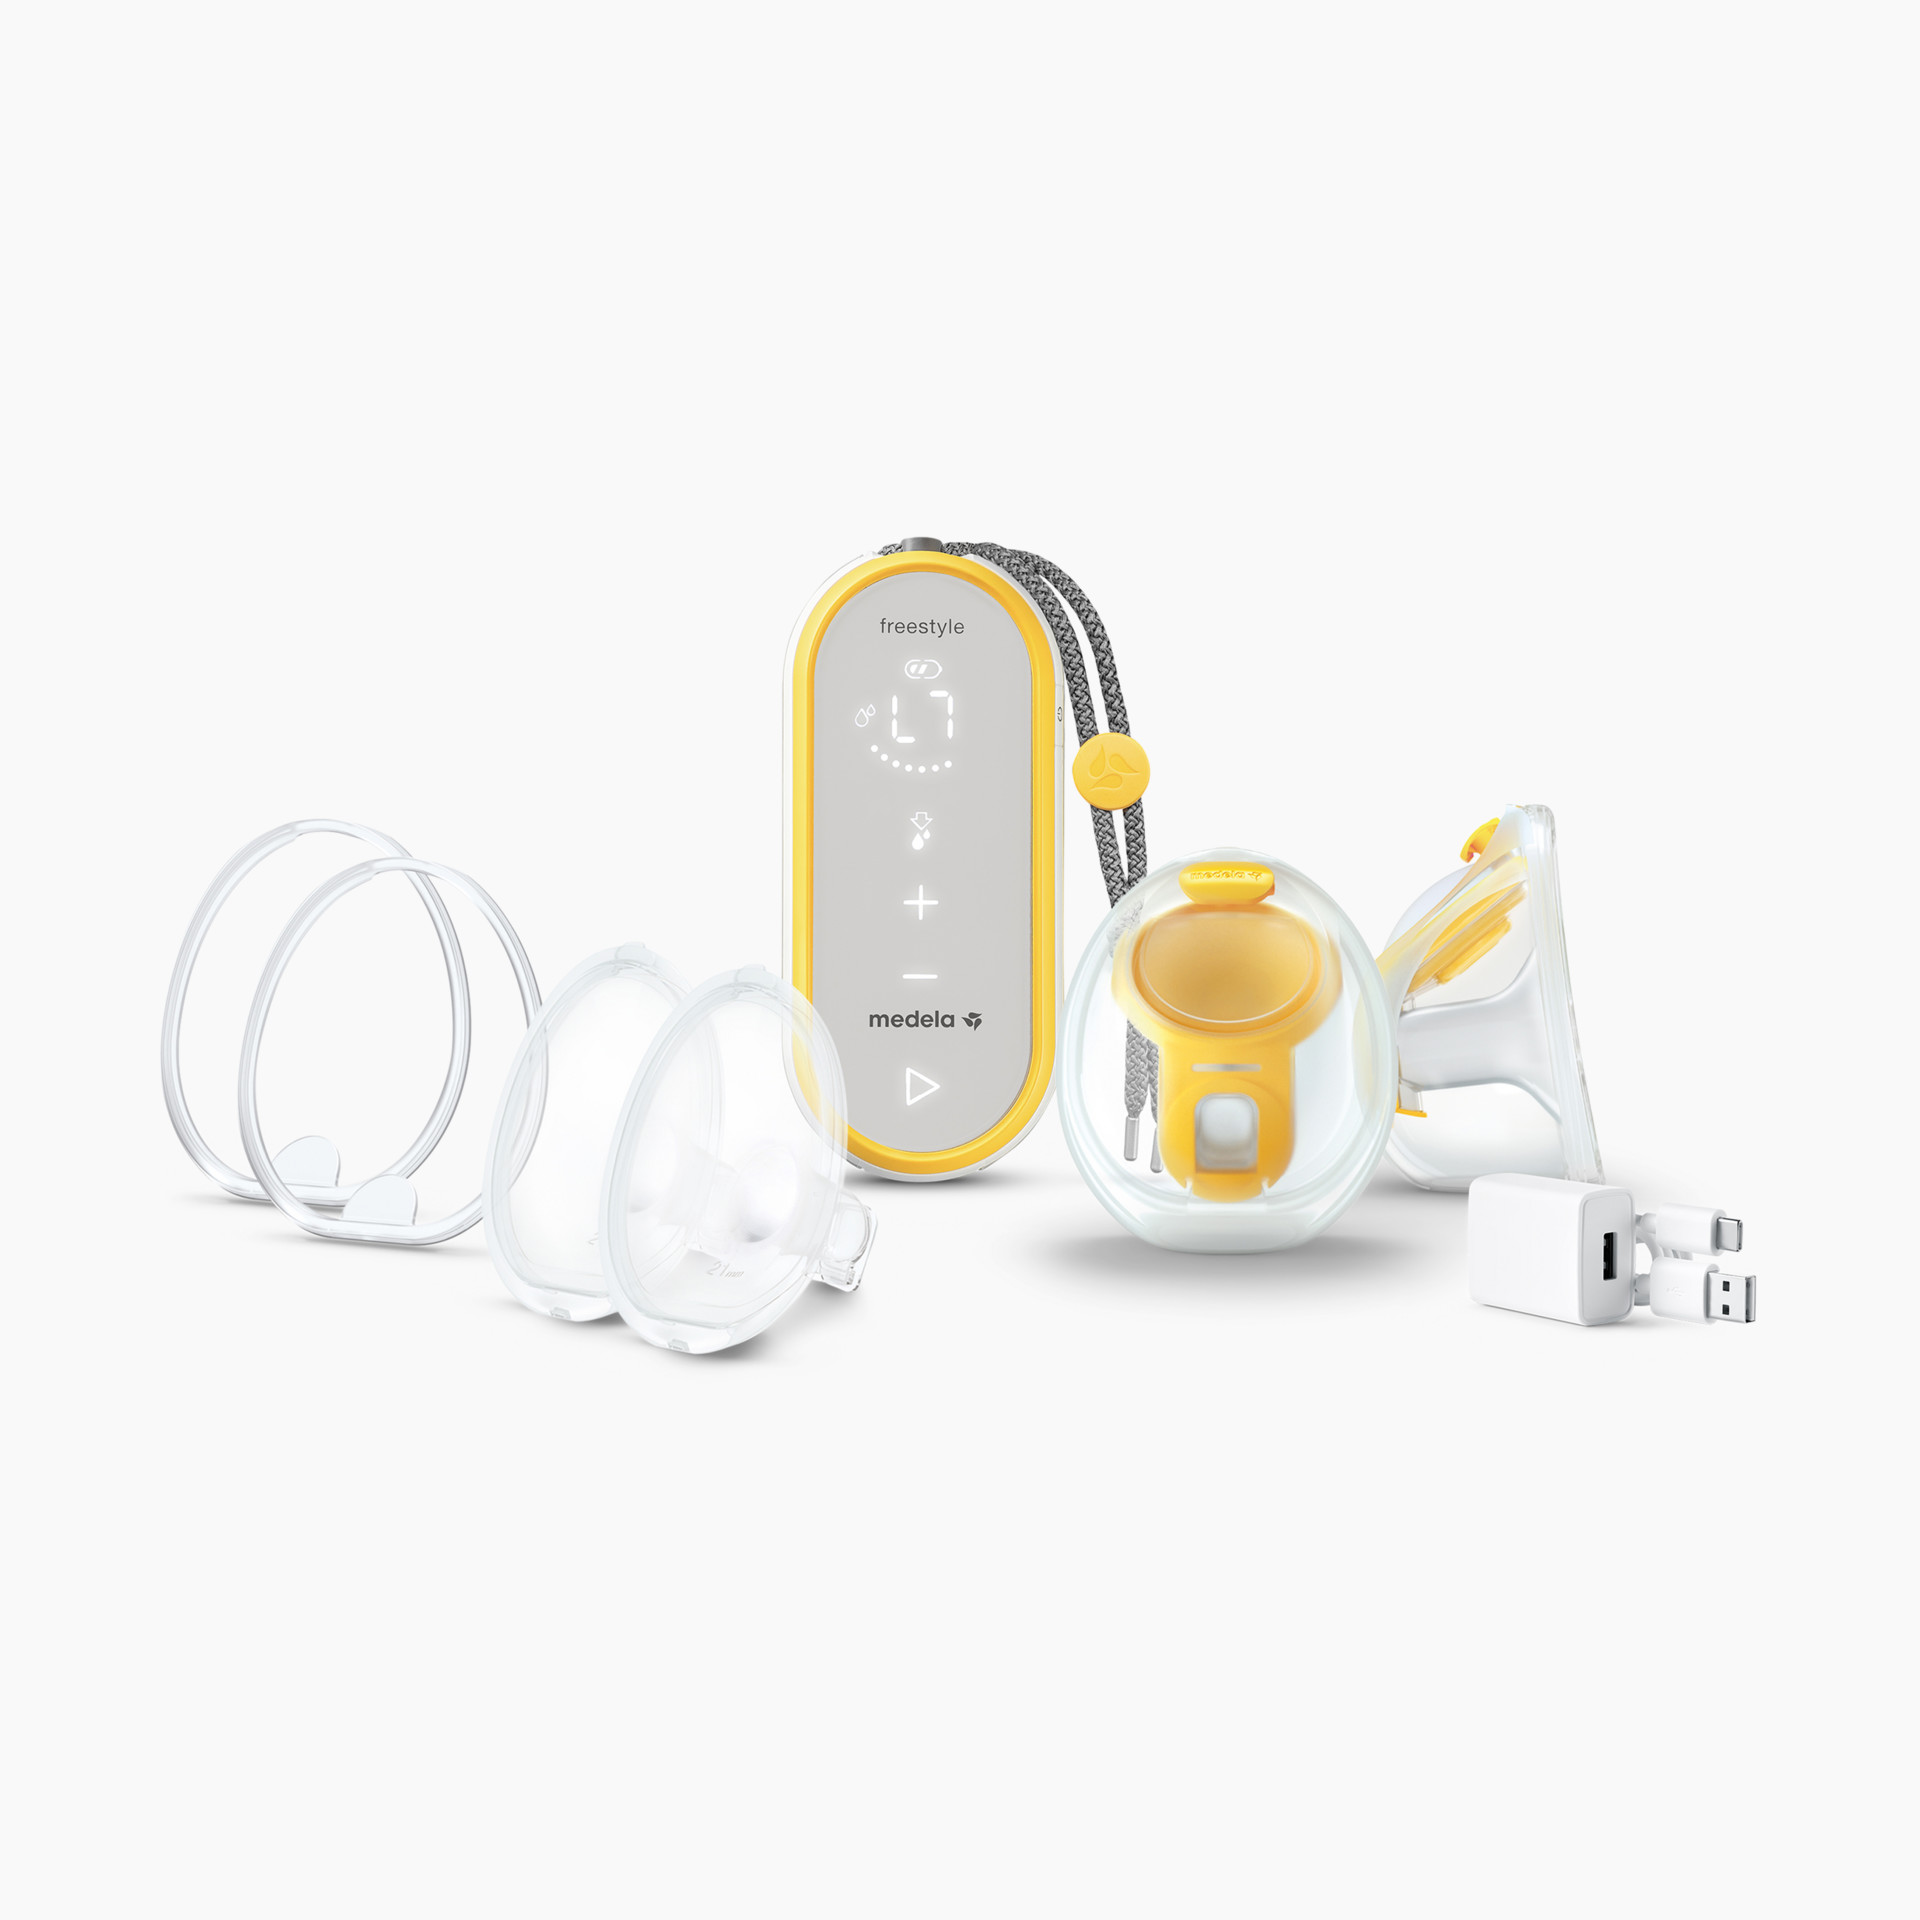 Medela Freestyle BreastPump,Medela FreeStyle BreastPump for moms who pump  several times a day-Pumping milk made easy!